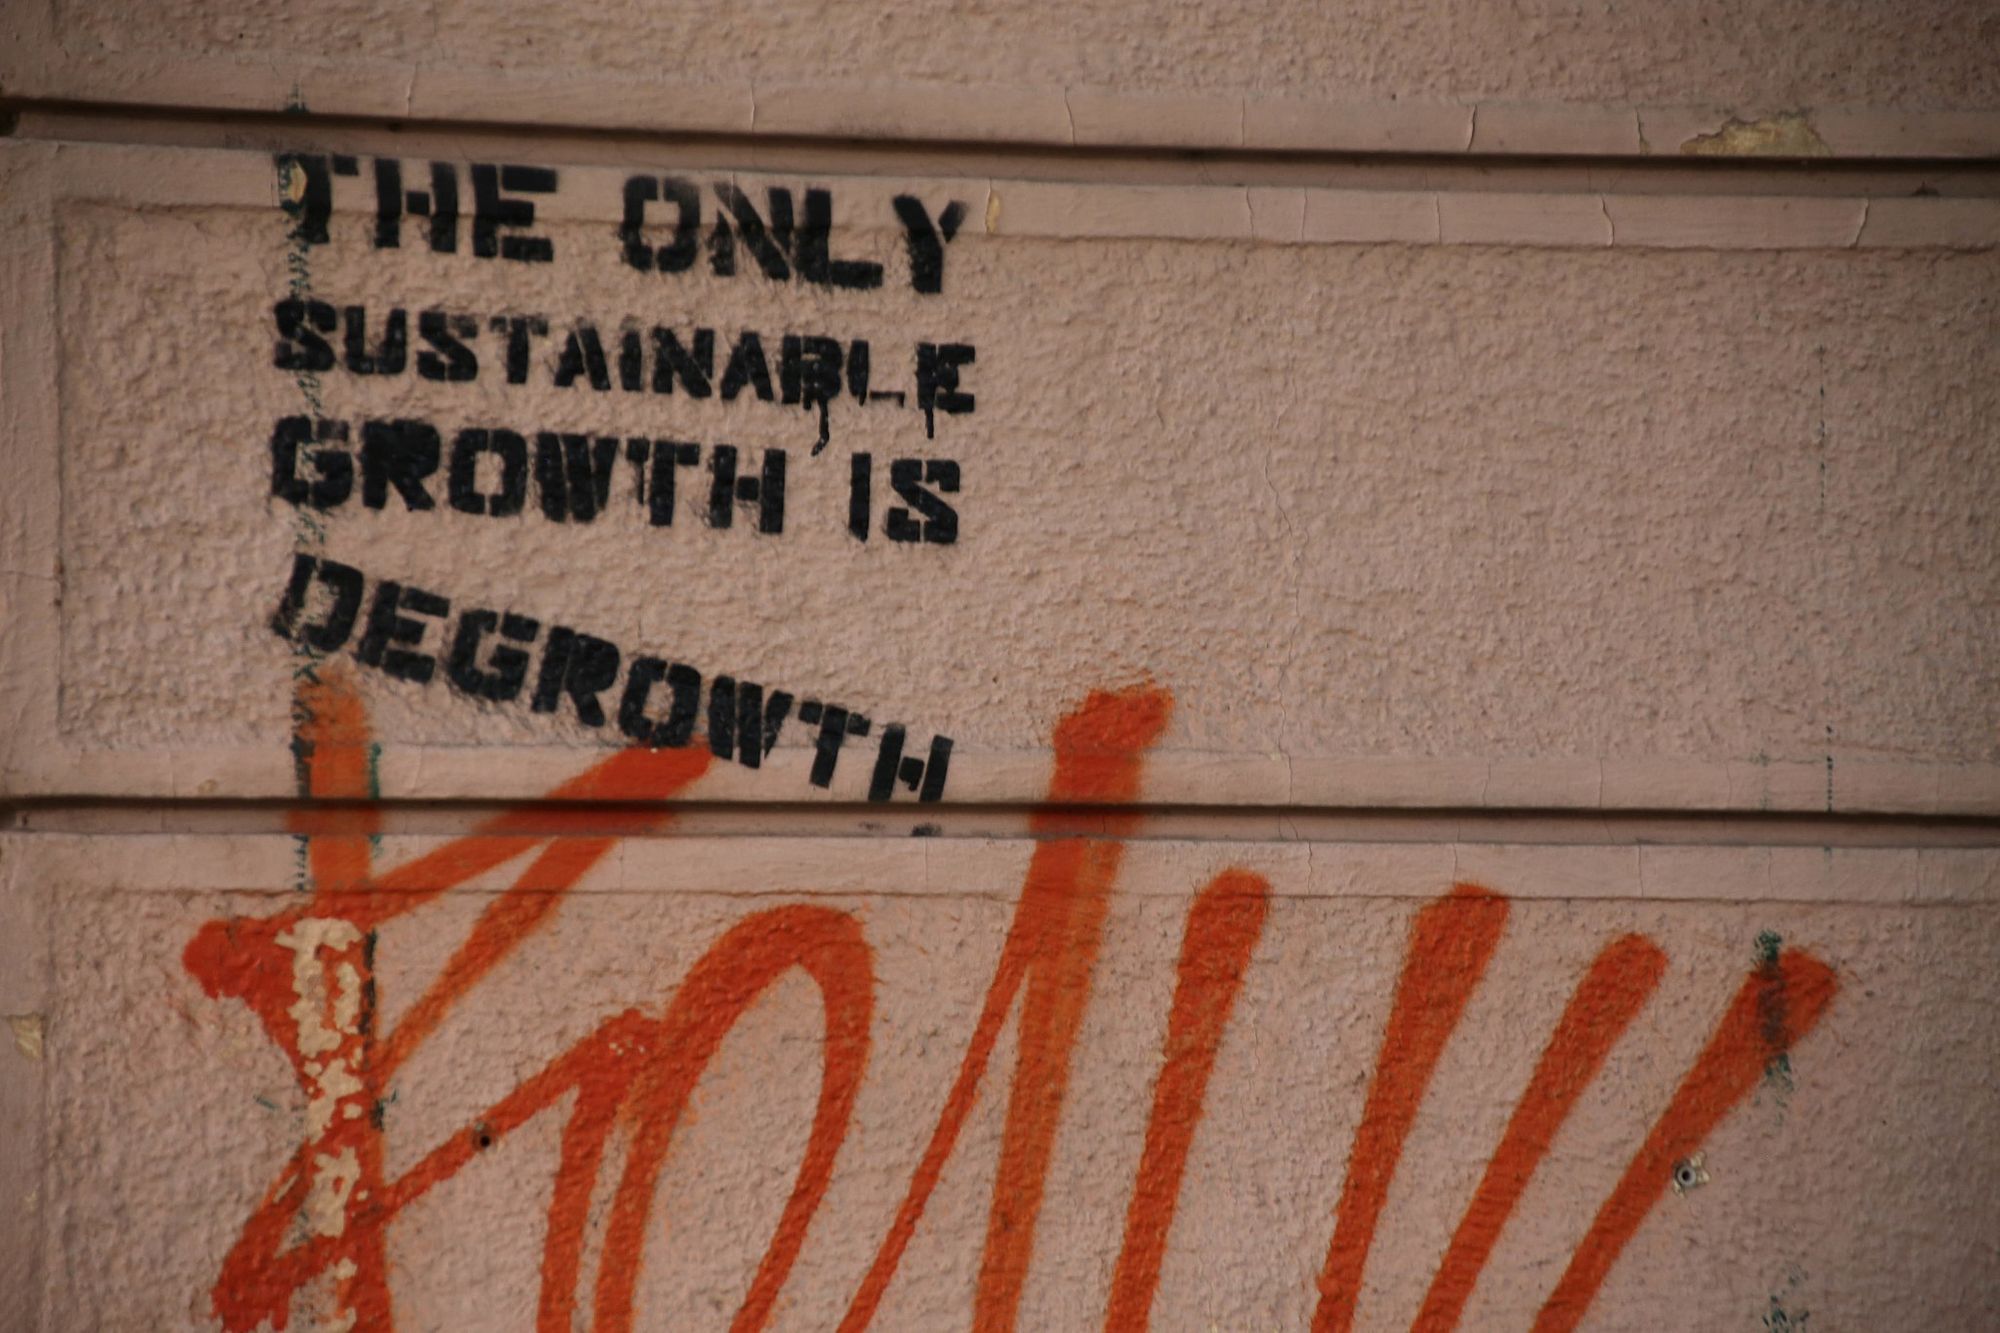 Post-growth, degrowth, the doughnut and circular economy: a short guide